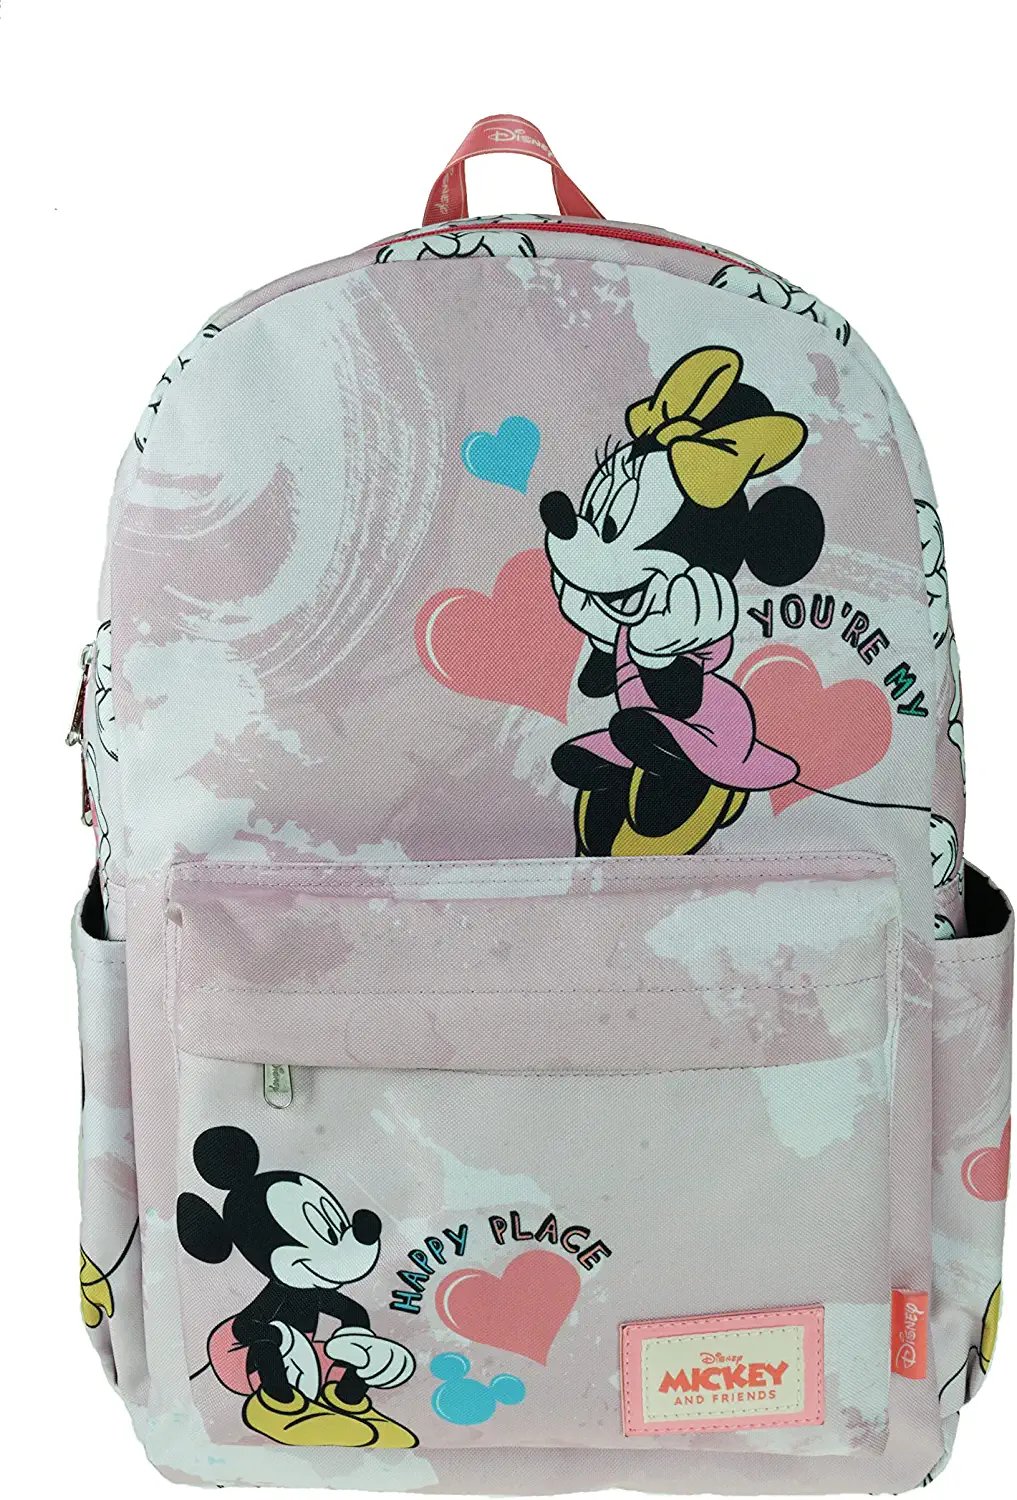 Disney Minnie Mouse Backpack 17" with Laptop Compartment for School, Travel, and Work - image 1 of 7